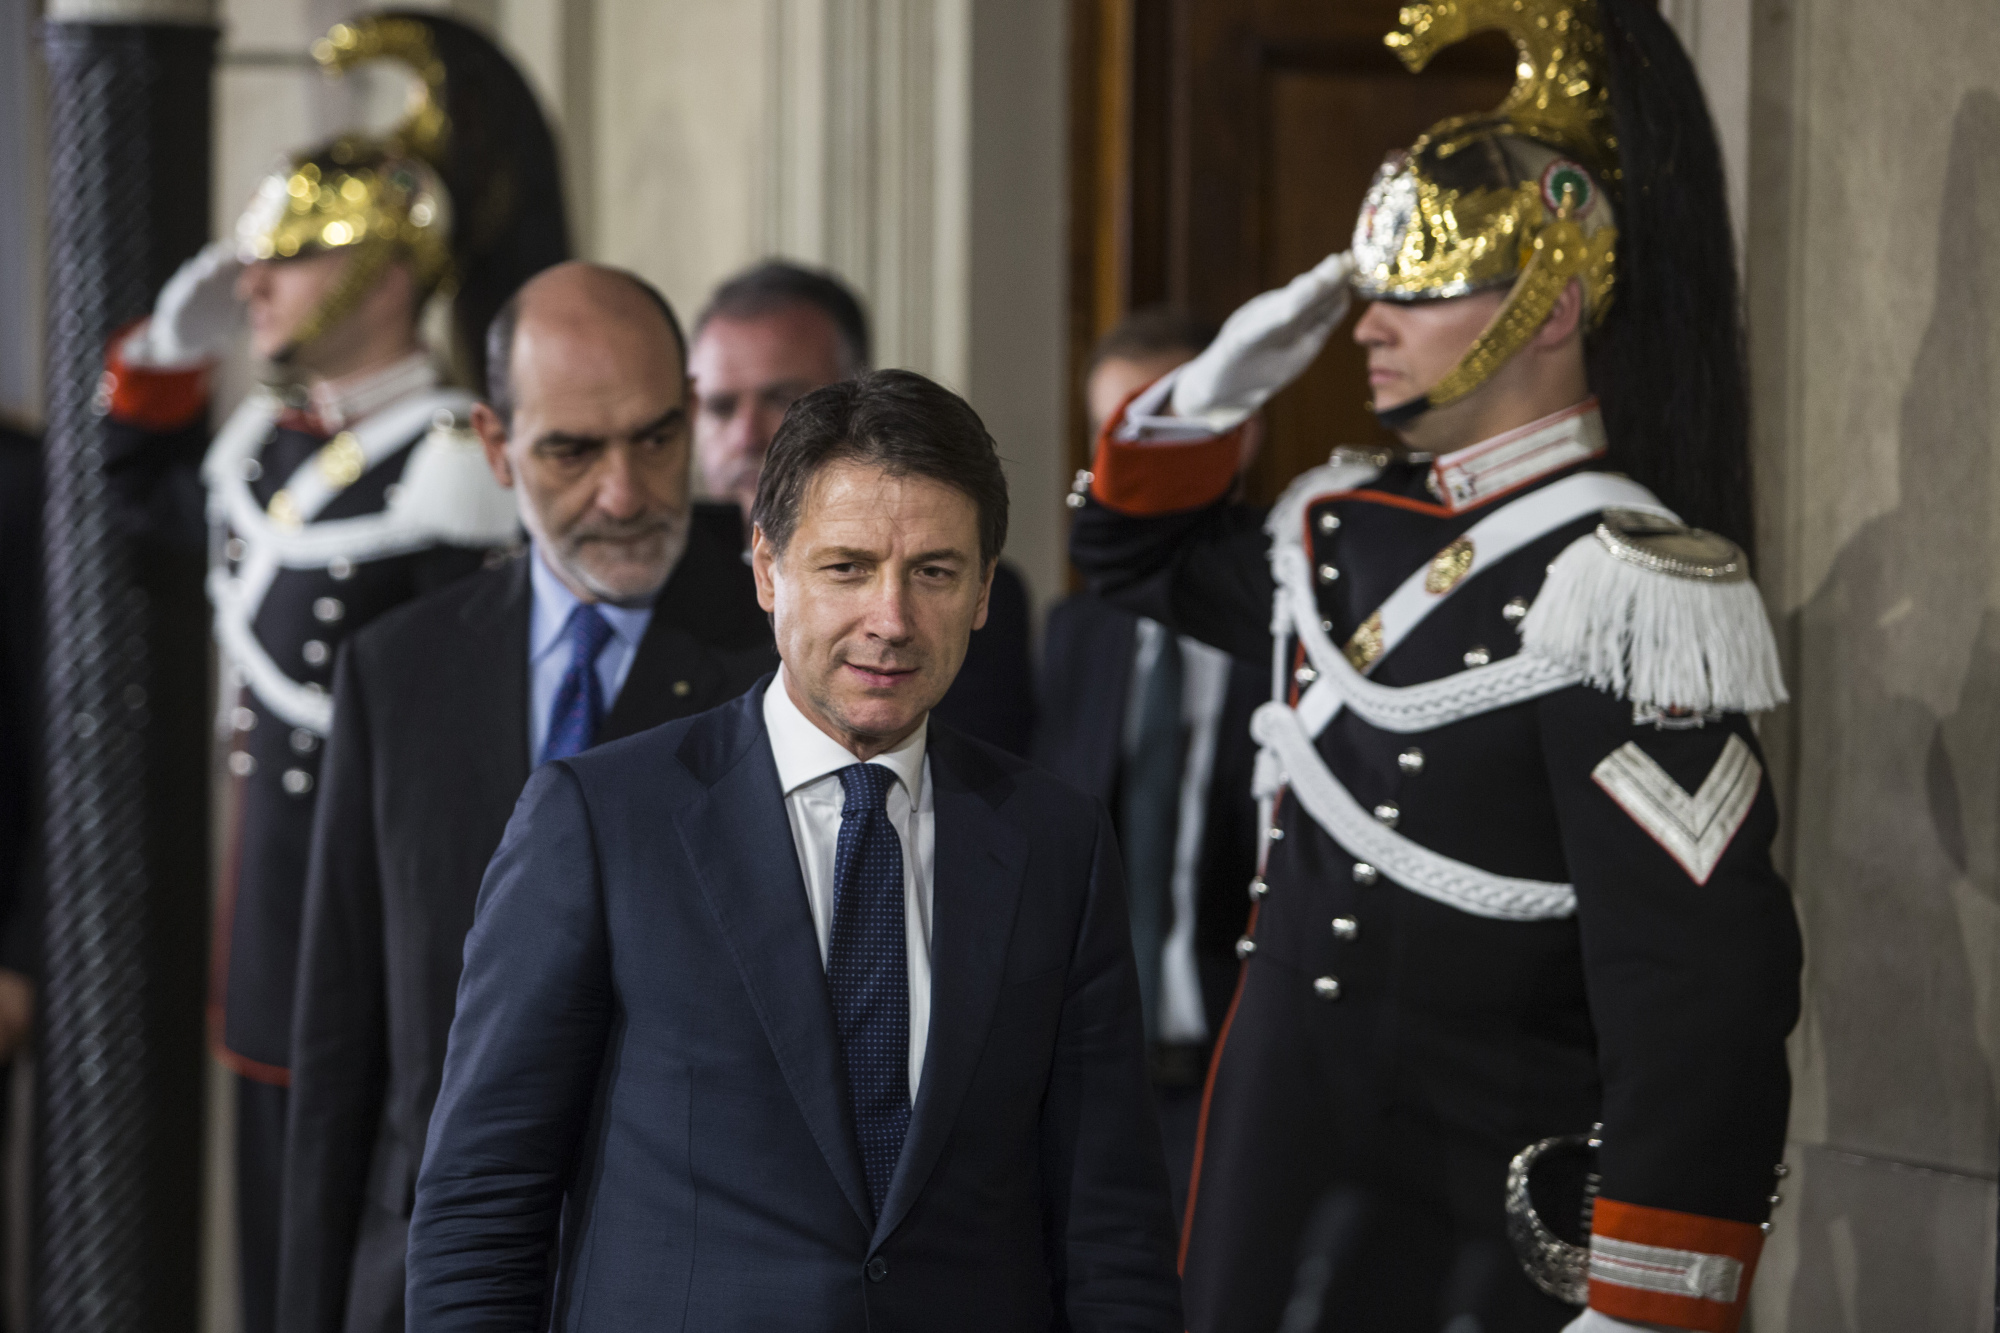 Giuseppe Conte, Italy's premier-designate, arrives to speak at a press conference after meeting President&nbsp;Sergio Mattarella at the Quirinale Palace in Rome.